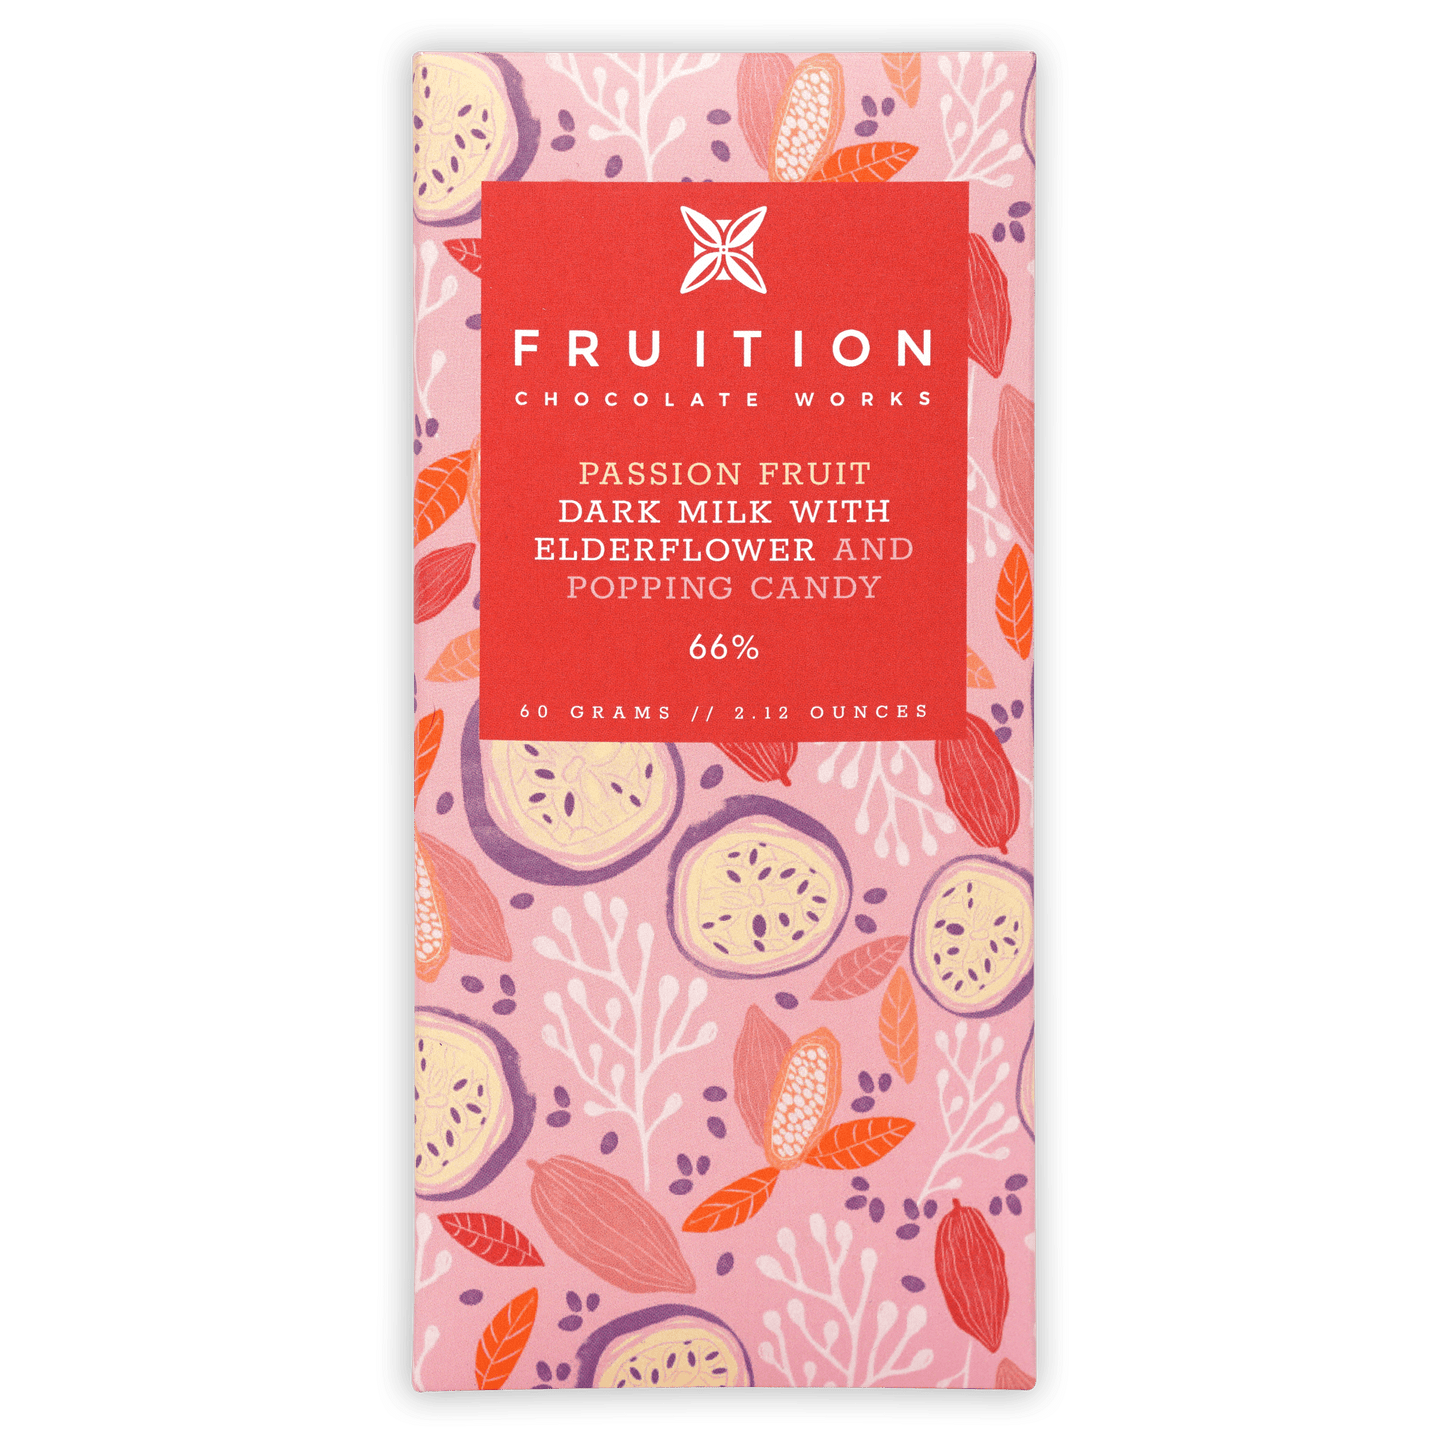 Fruition Passion Fruit Dark Milk with Elderflower and Popping Candy 66%